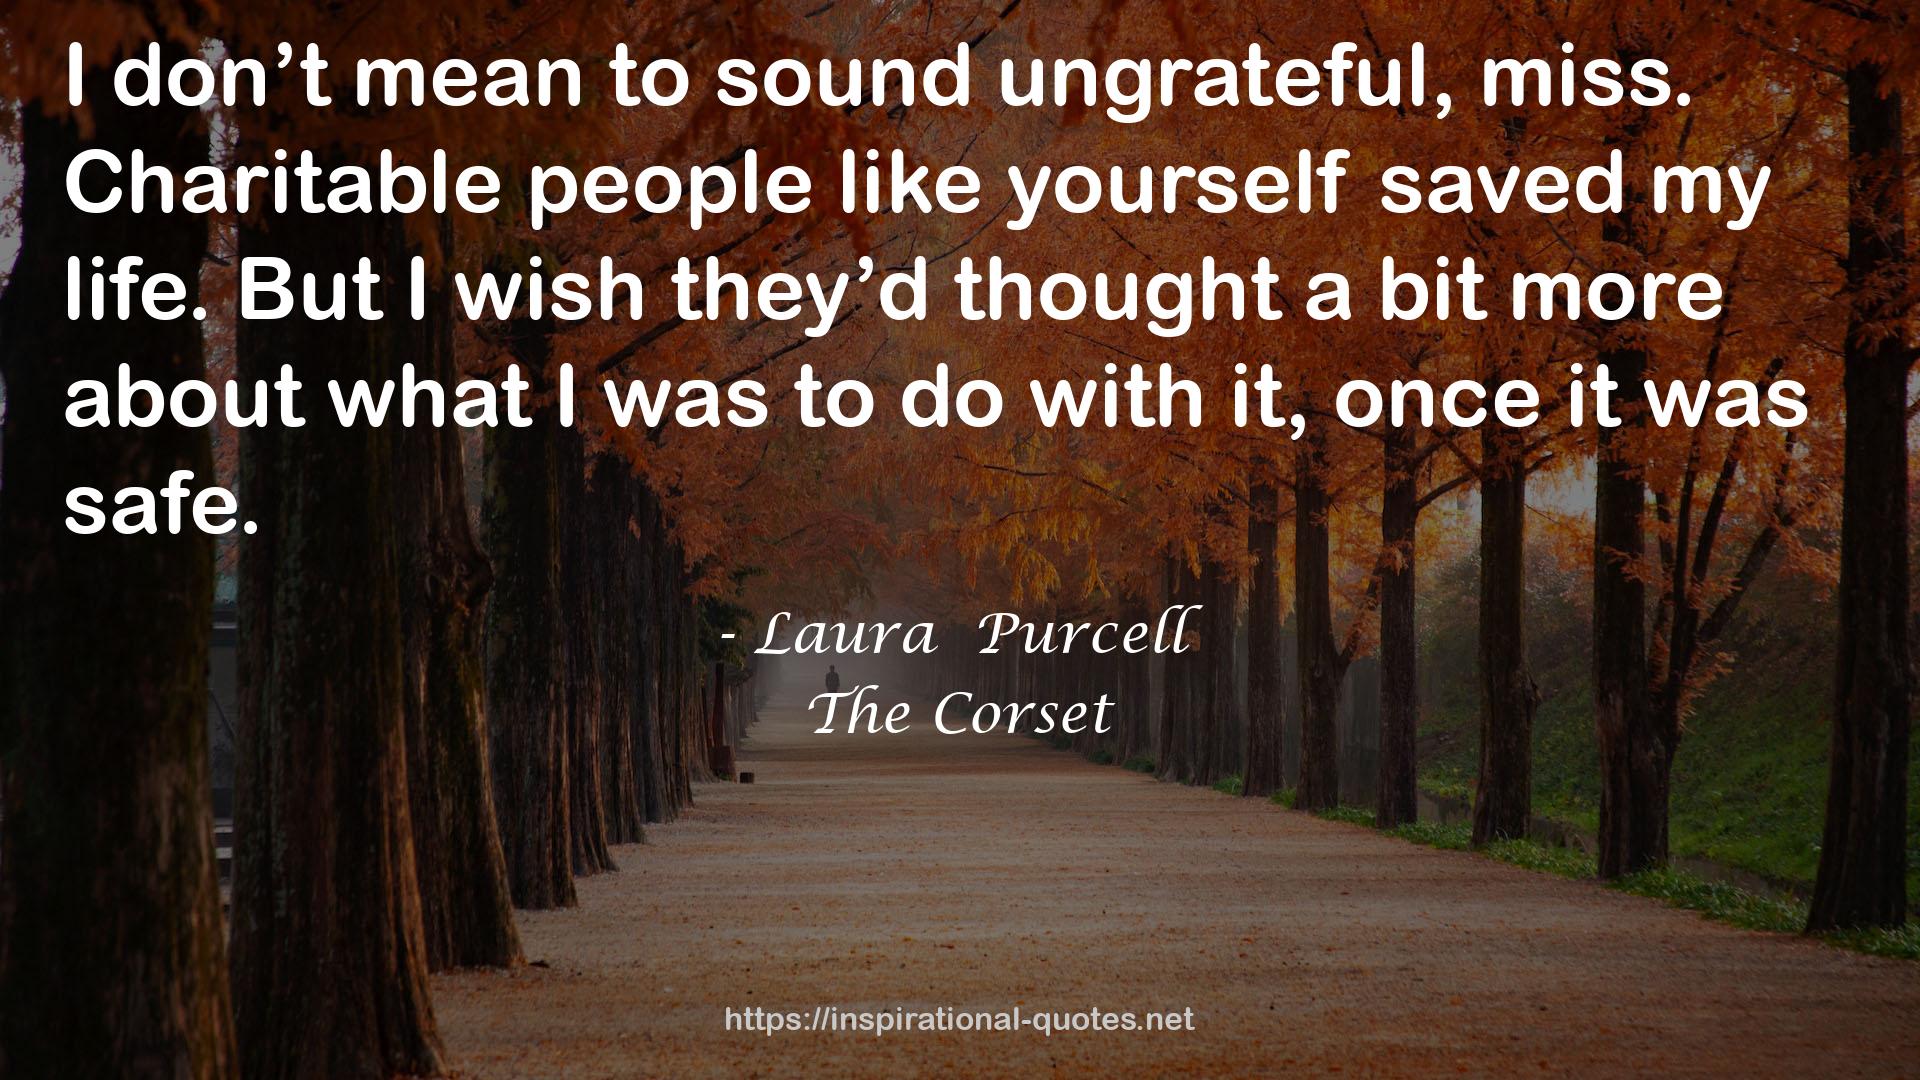 Laura  Purcell QUOTES